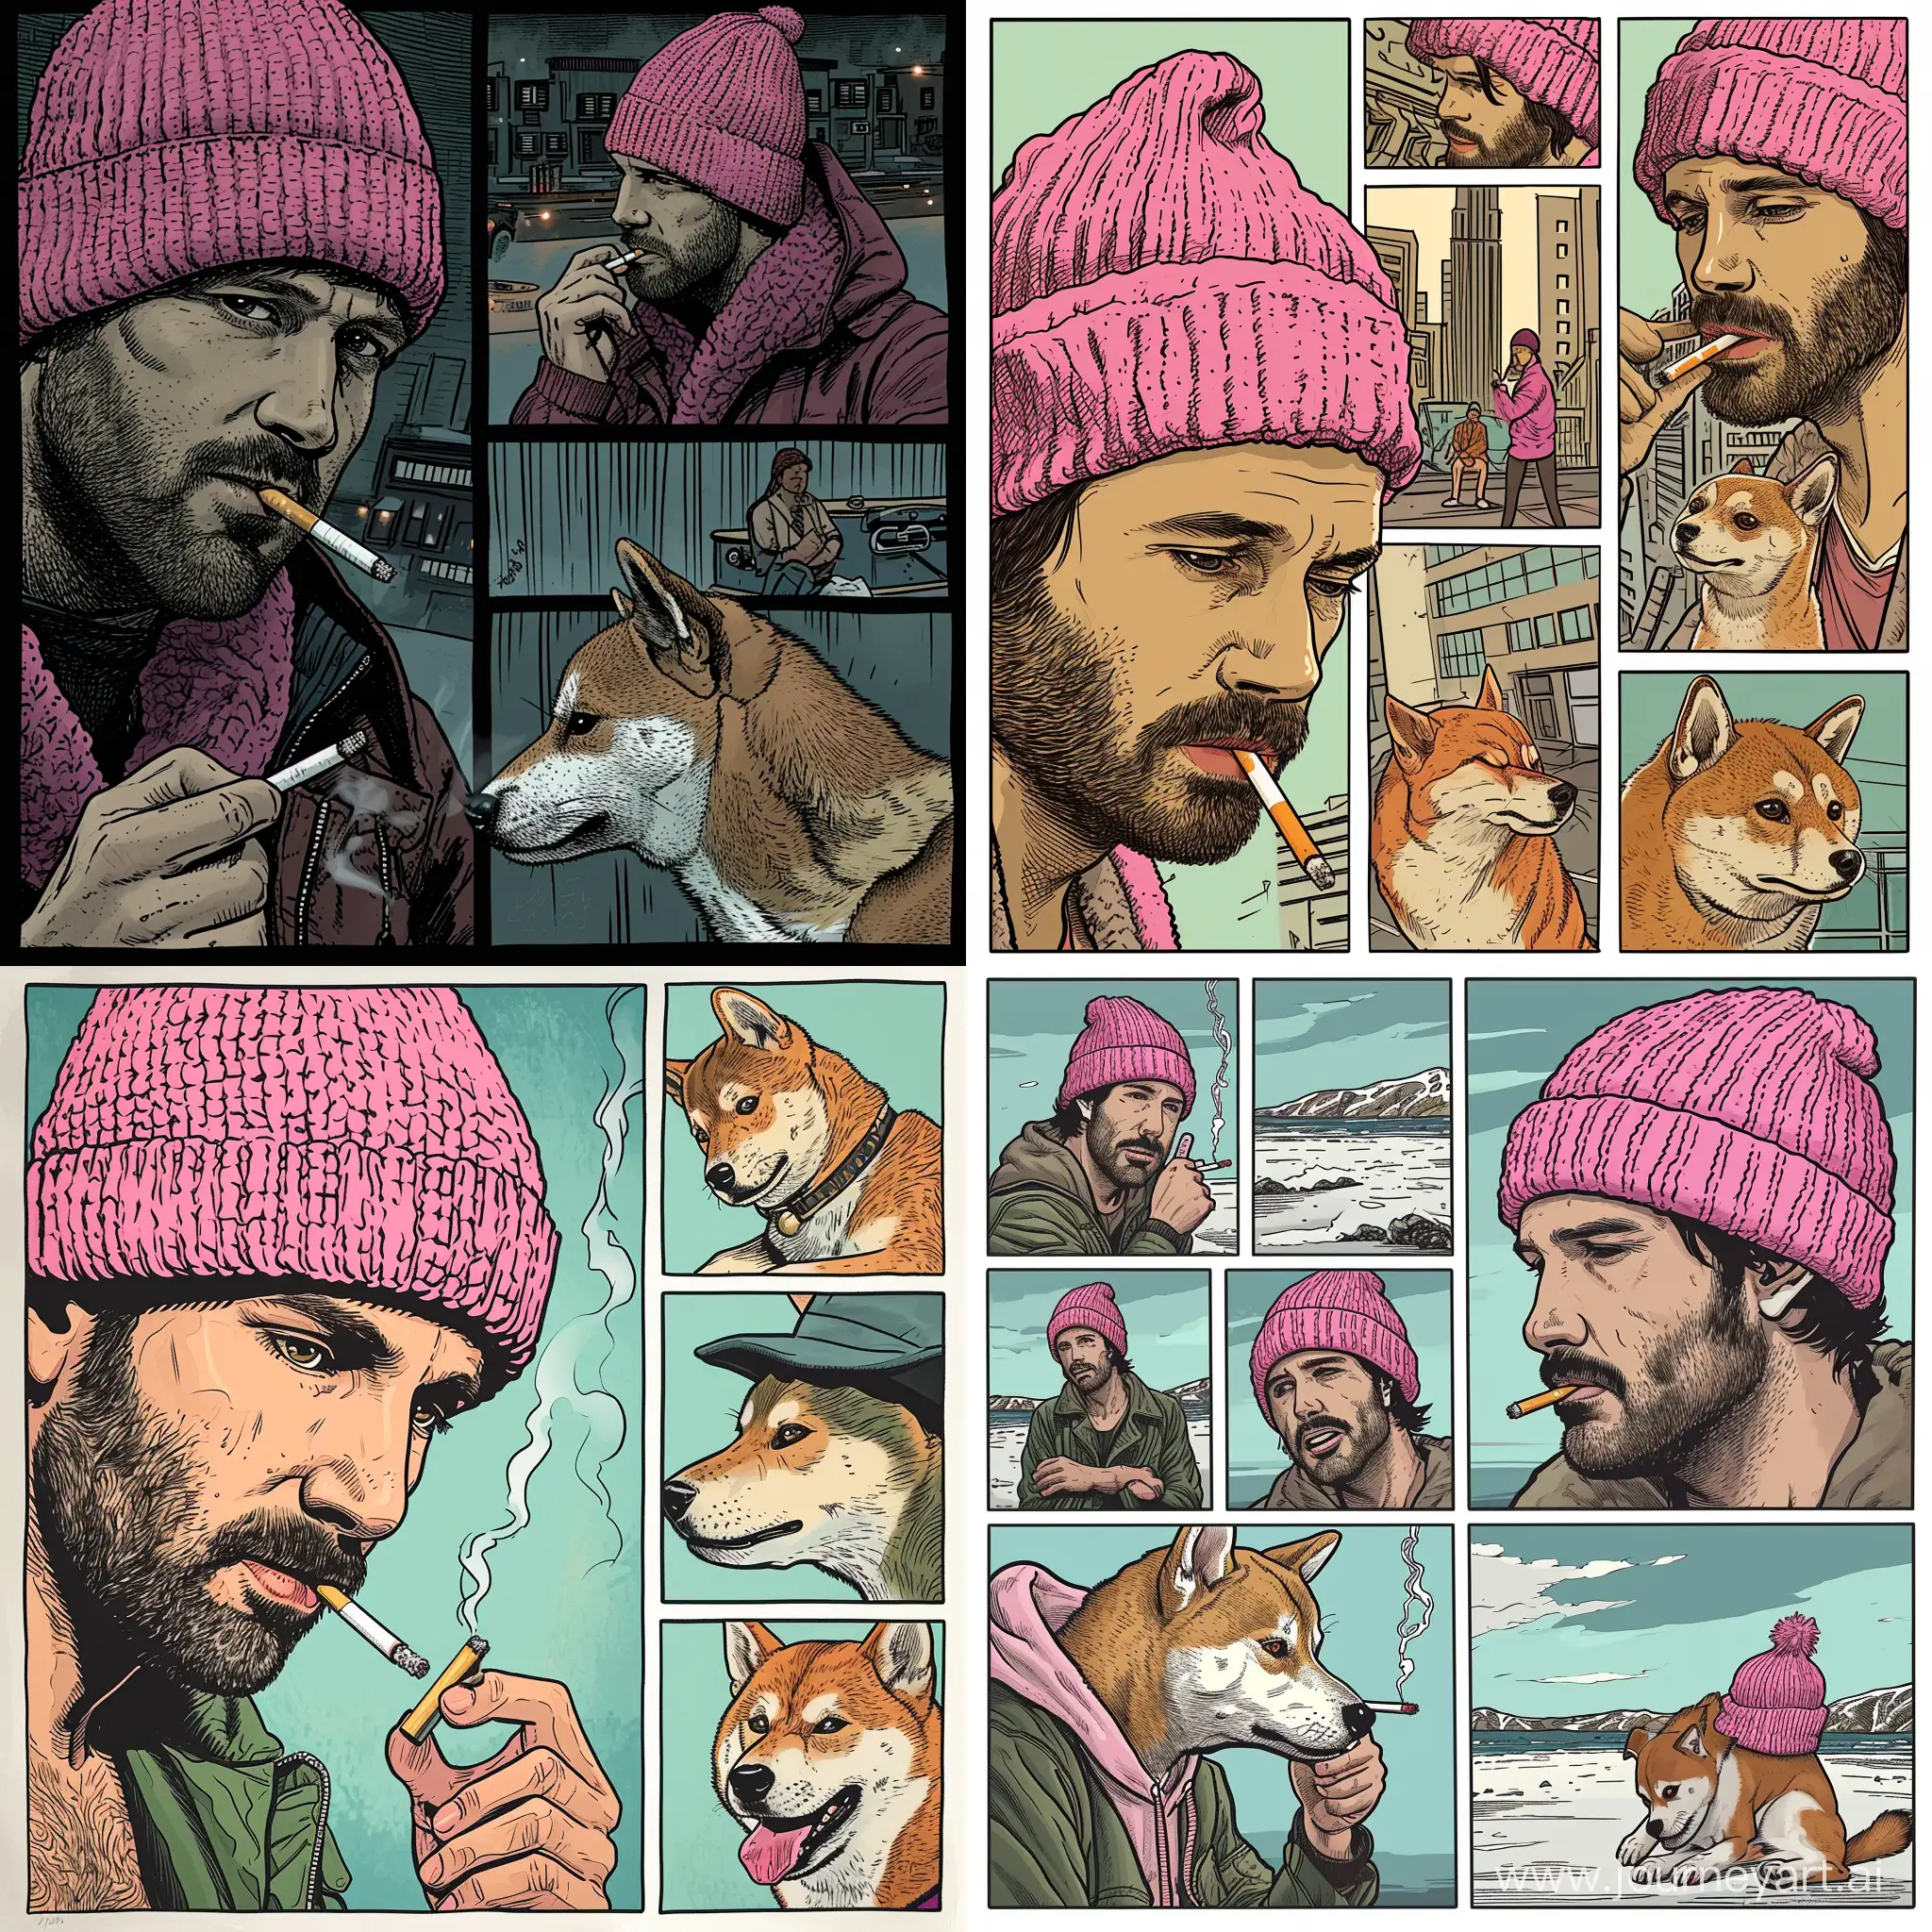 Ben-Affleck-in-Pink-Beanie-Hat-with-Shiba-Inu-DC-Comic-Strip-Style